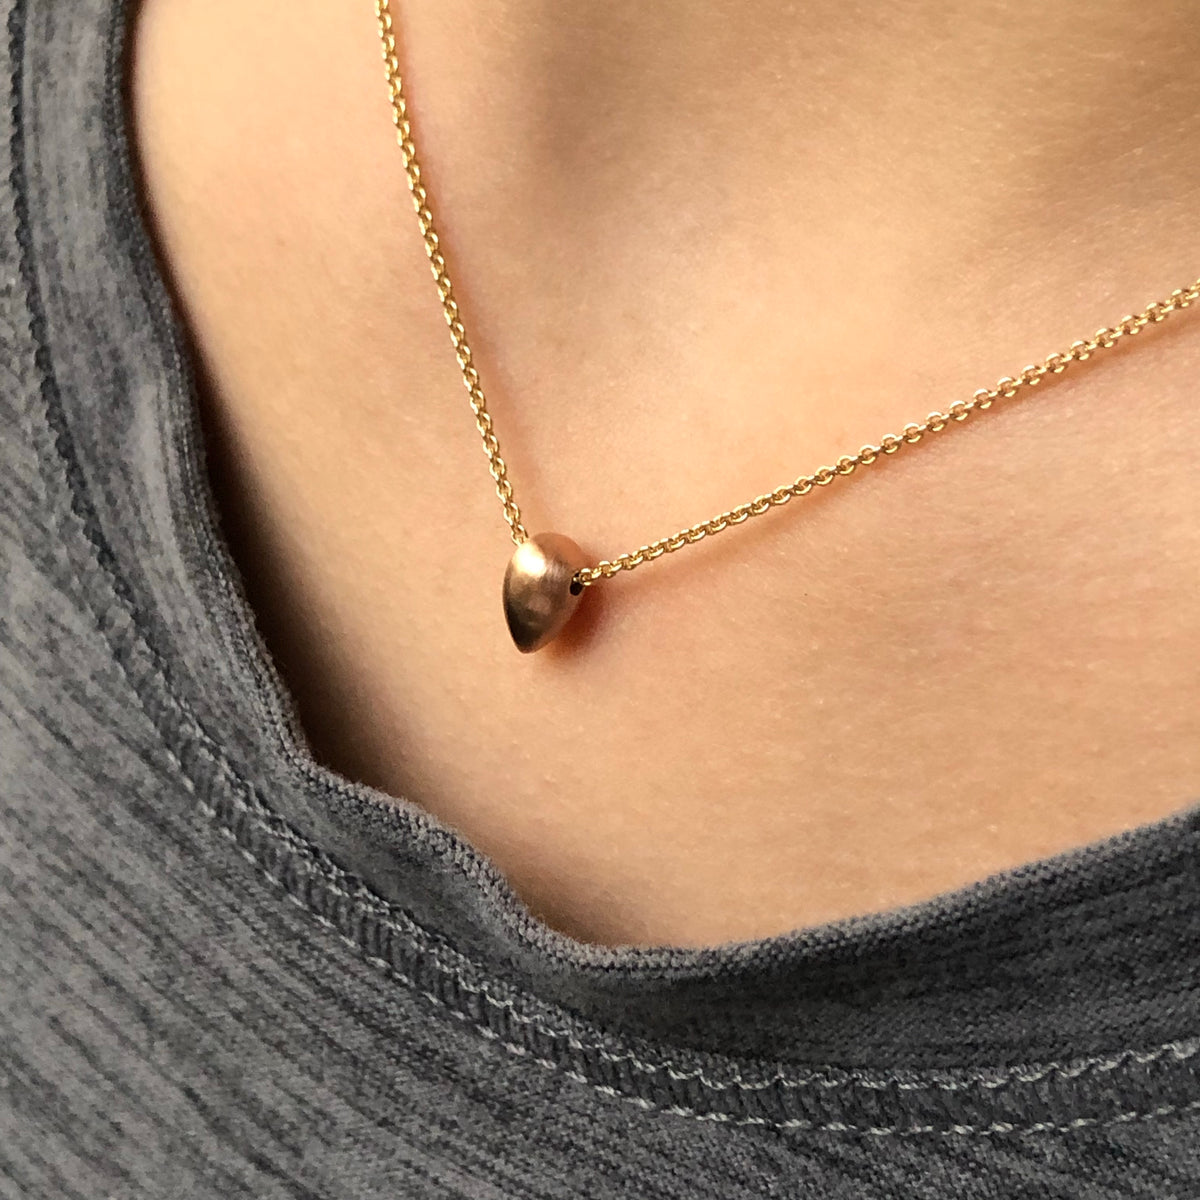 GOLD SACRED SEED NECKLACE